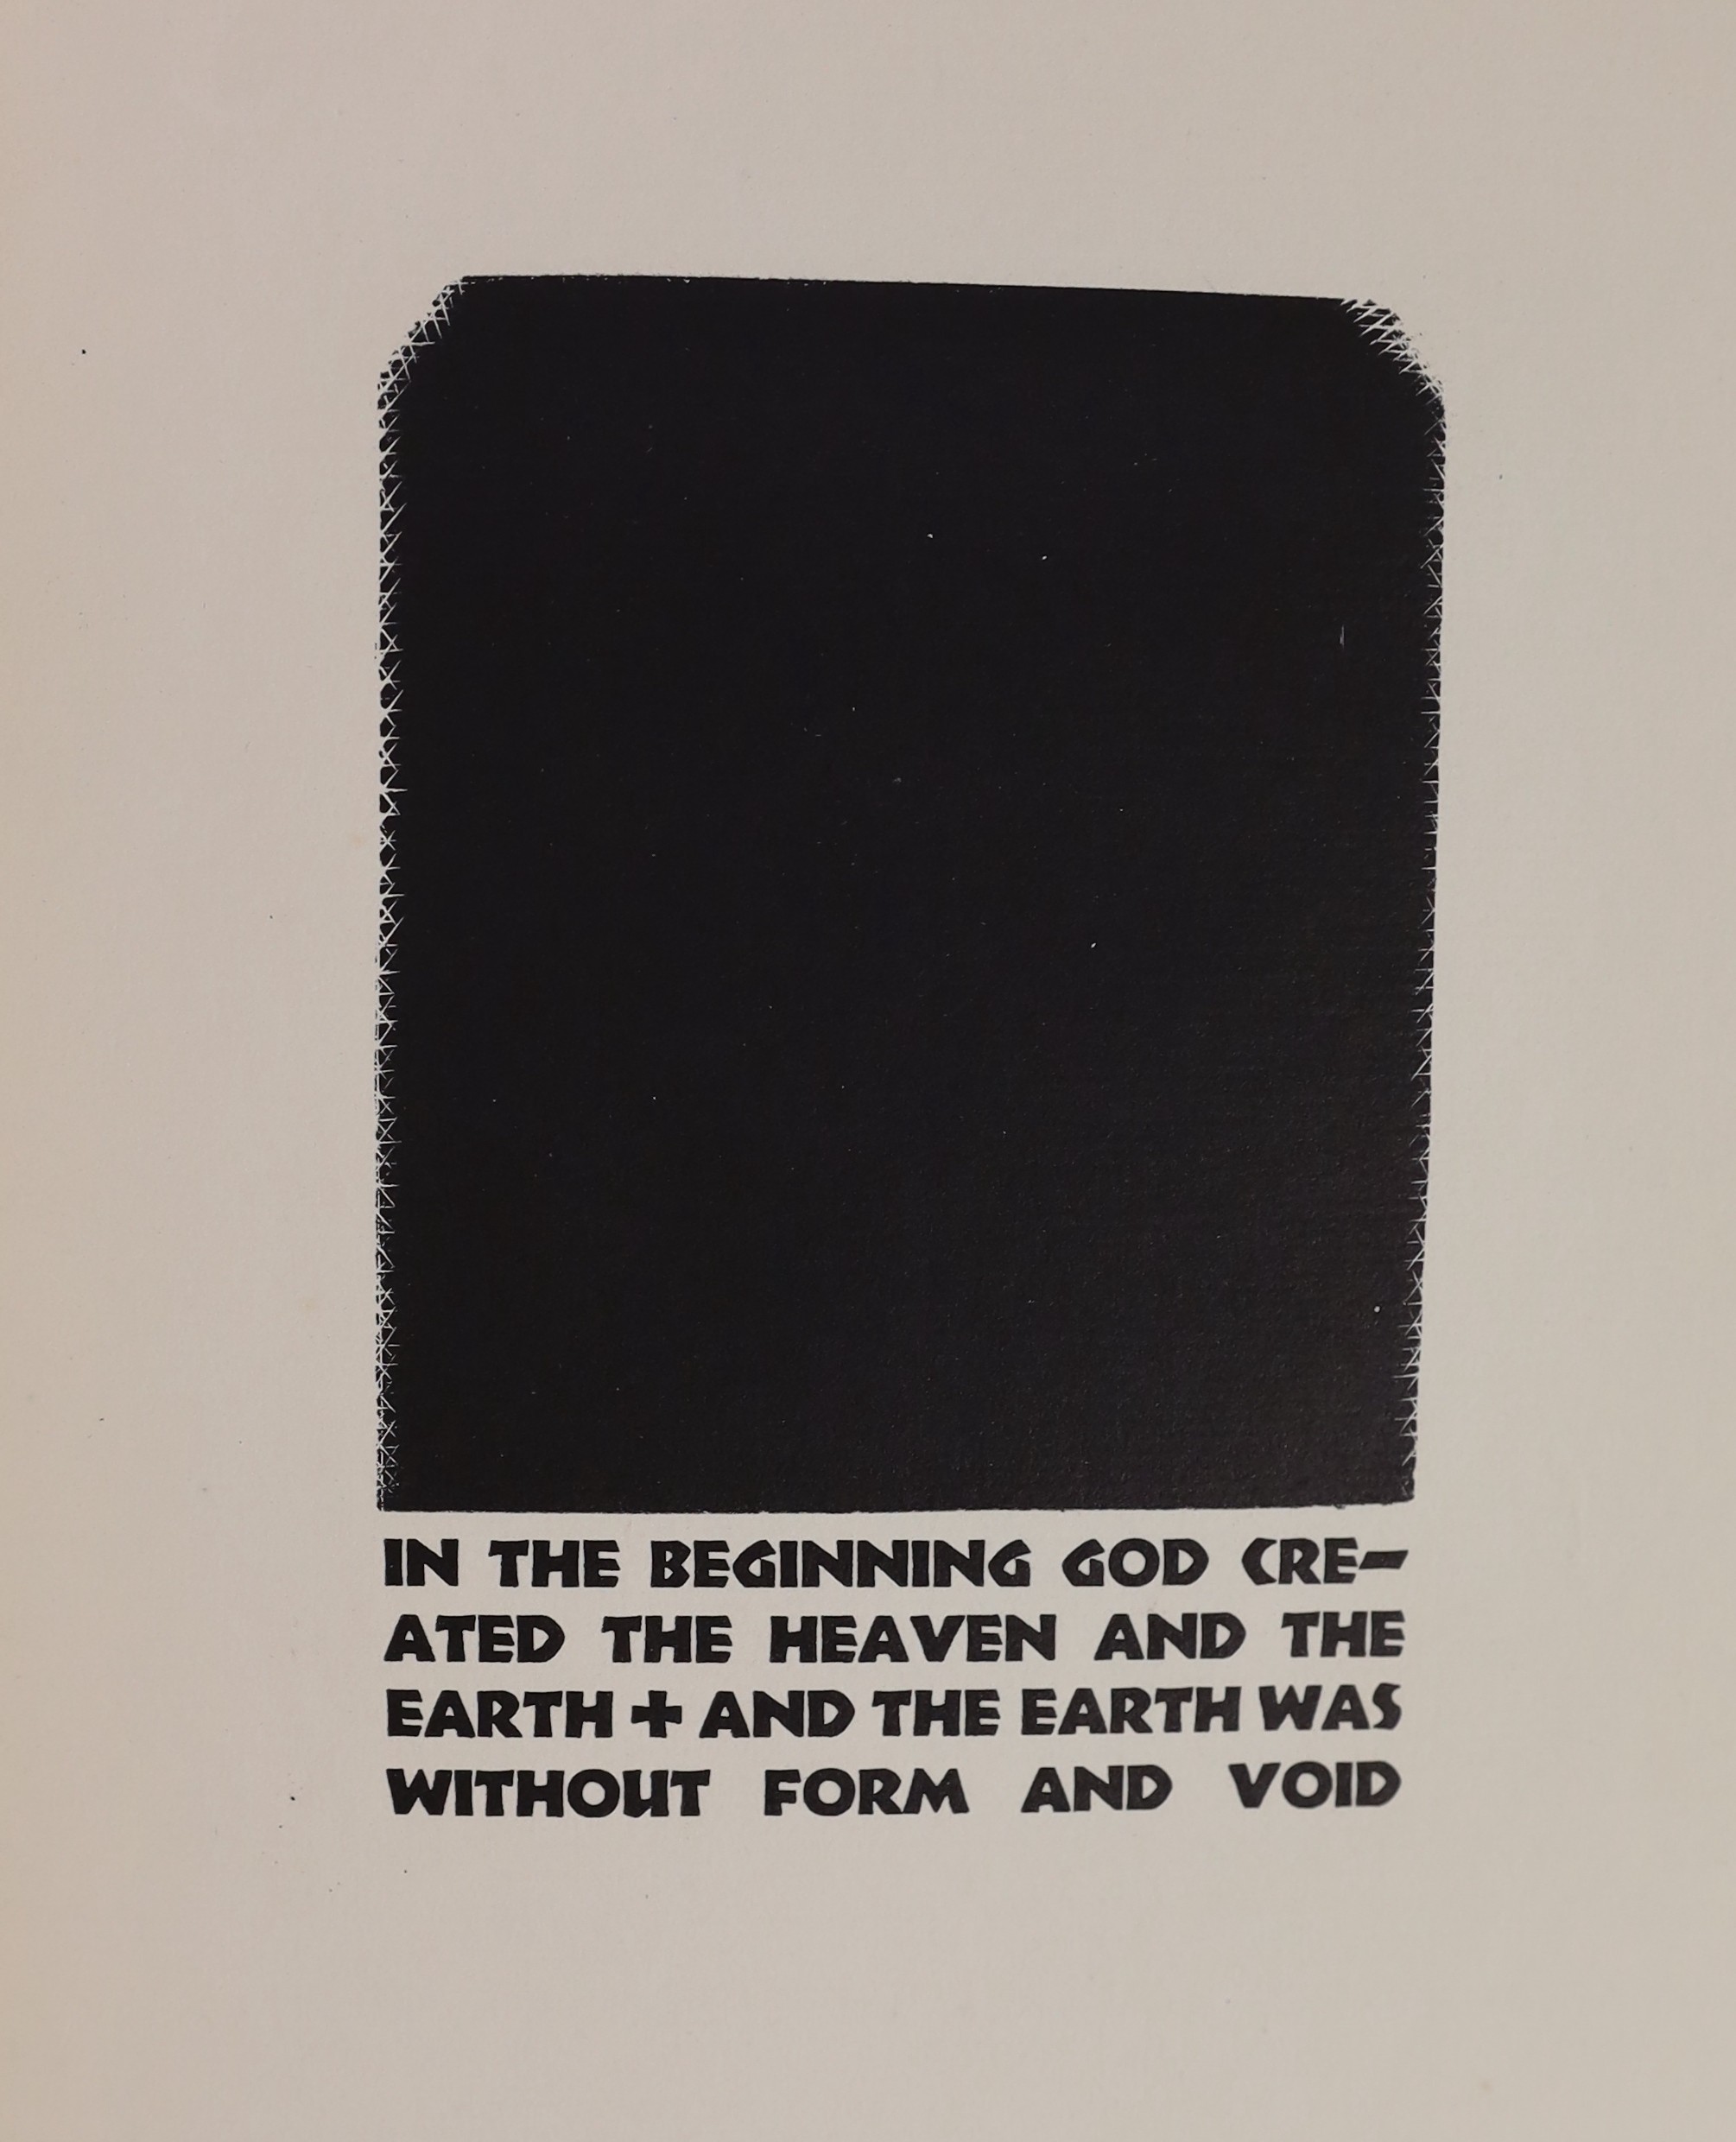 Bible in English - Nash, Paul [illustrator] - Genesis. Limited edition, one of 375, Authors presentation copy to his wife with signed inscription. Complete with 12 woodcut illustrations by Paul Nash. Original black paper